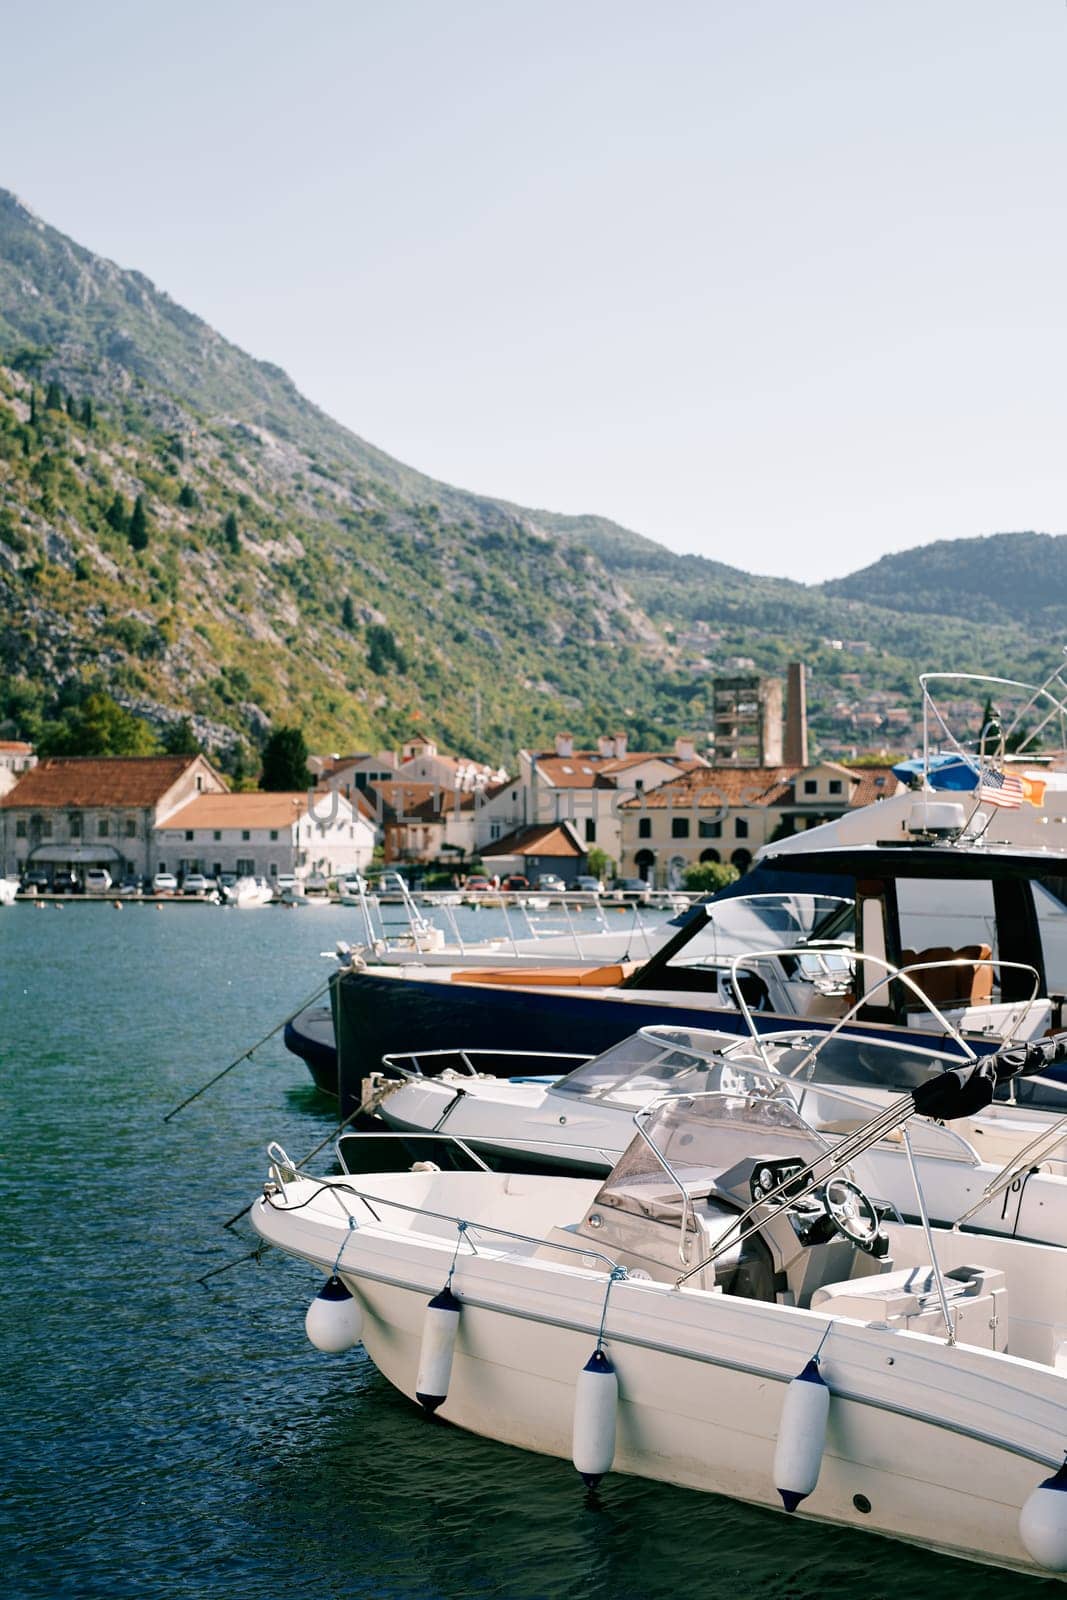 Motorboats are moored along the shore overlooking ancient houses at the foot of the mountains. Kotor, Montenegro. High quality photo